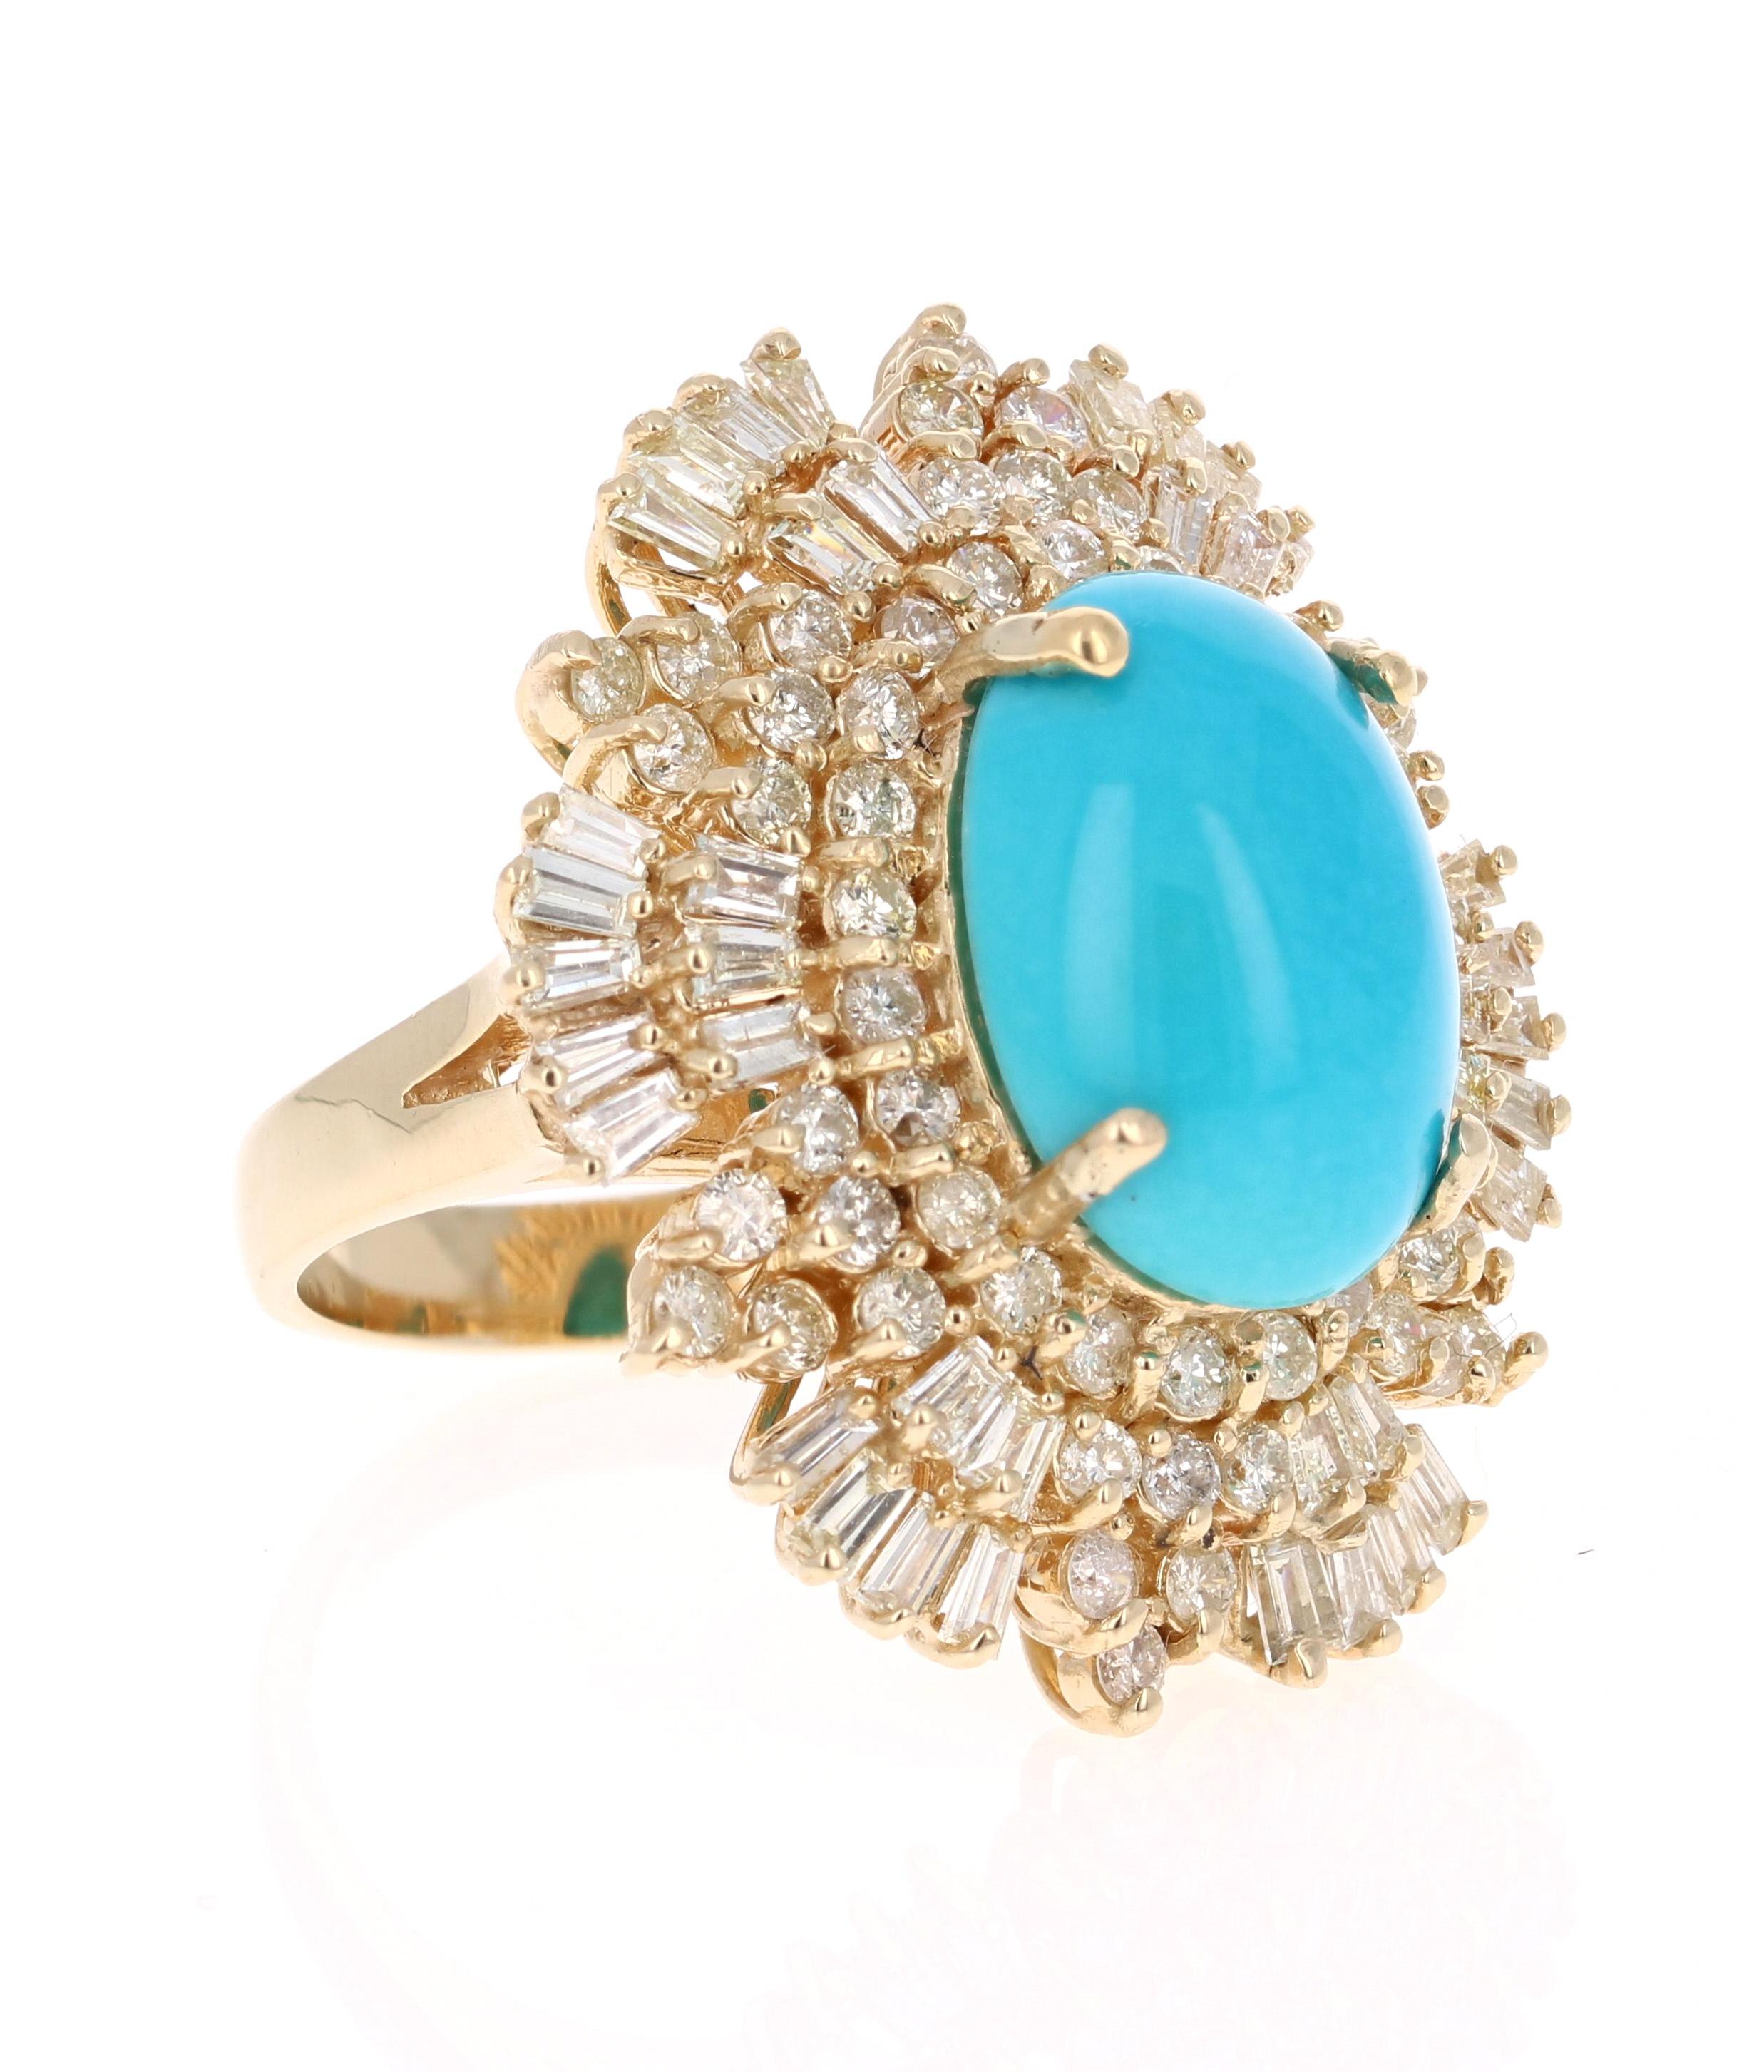 This is an exceptional and unique beauty

The Oval Cut Turquoise is 7.67 Carats and is surrounded by a cluster of beautifully set diamonds. There are Natural Round Cut Diamonds that weigh 1.52 Carats and Natural Baguette Cut Diamonds that weigh 1.30